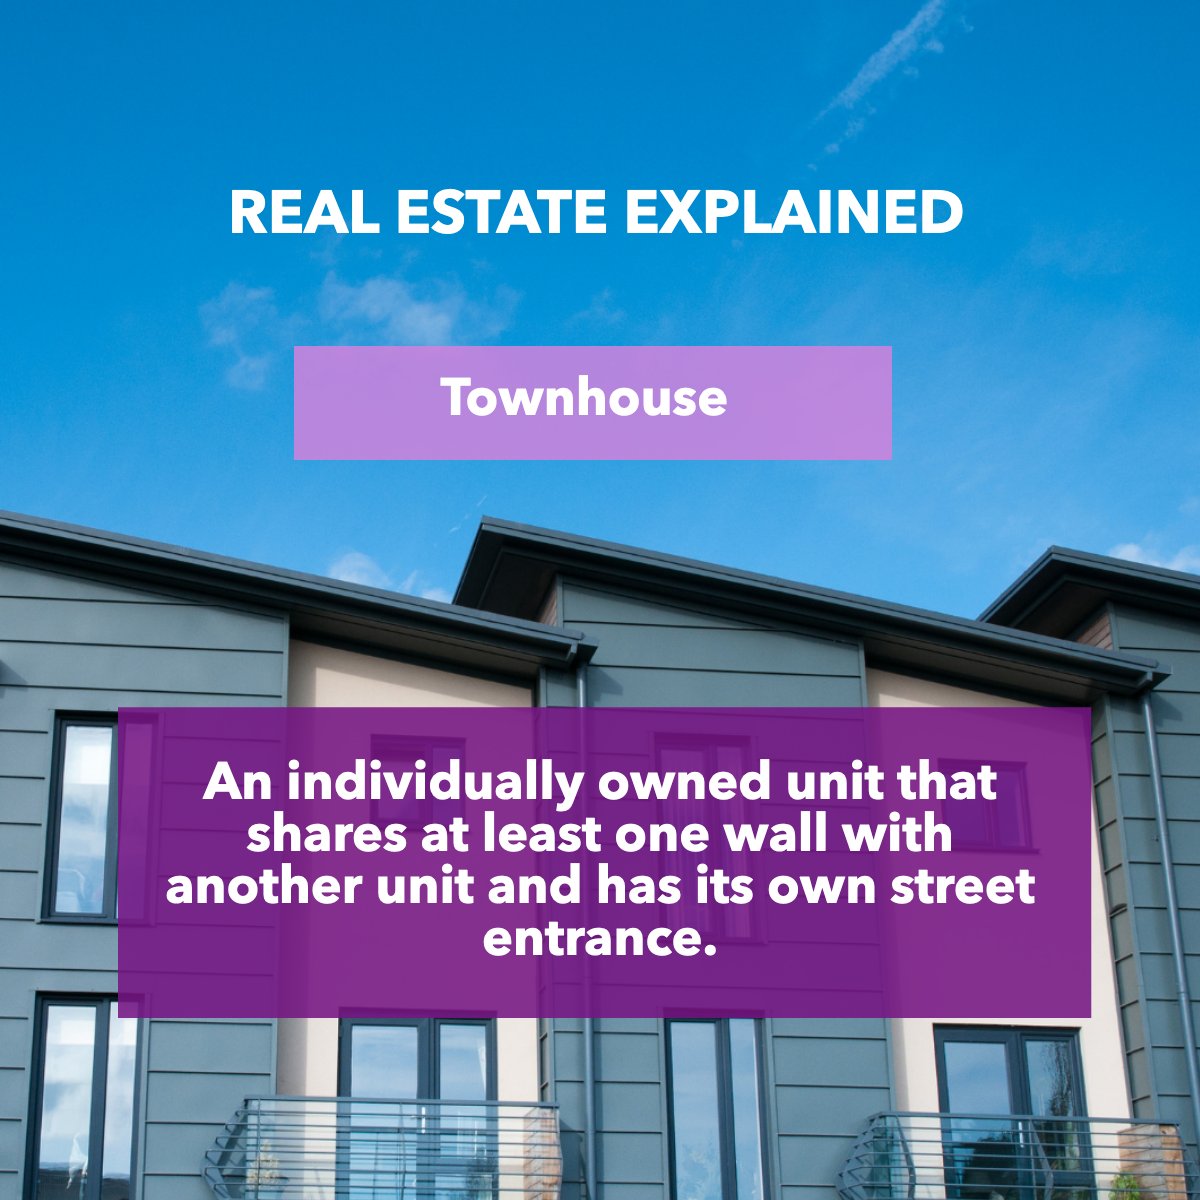 Did you know what a Townhouse is? 🤔

Is this the type of house that you like?

#townhouses #townhousestyle 
 #RacingRealEstateAgent #BarrettRealEstate #StoneTreeRealEstateTeam #maricopaazrealestate #racingagent #arizonarealestate #phoenixrealestateagent